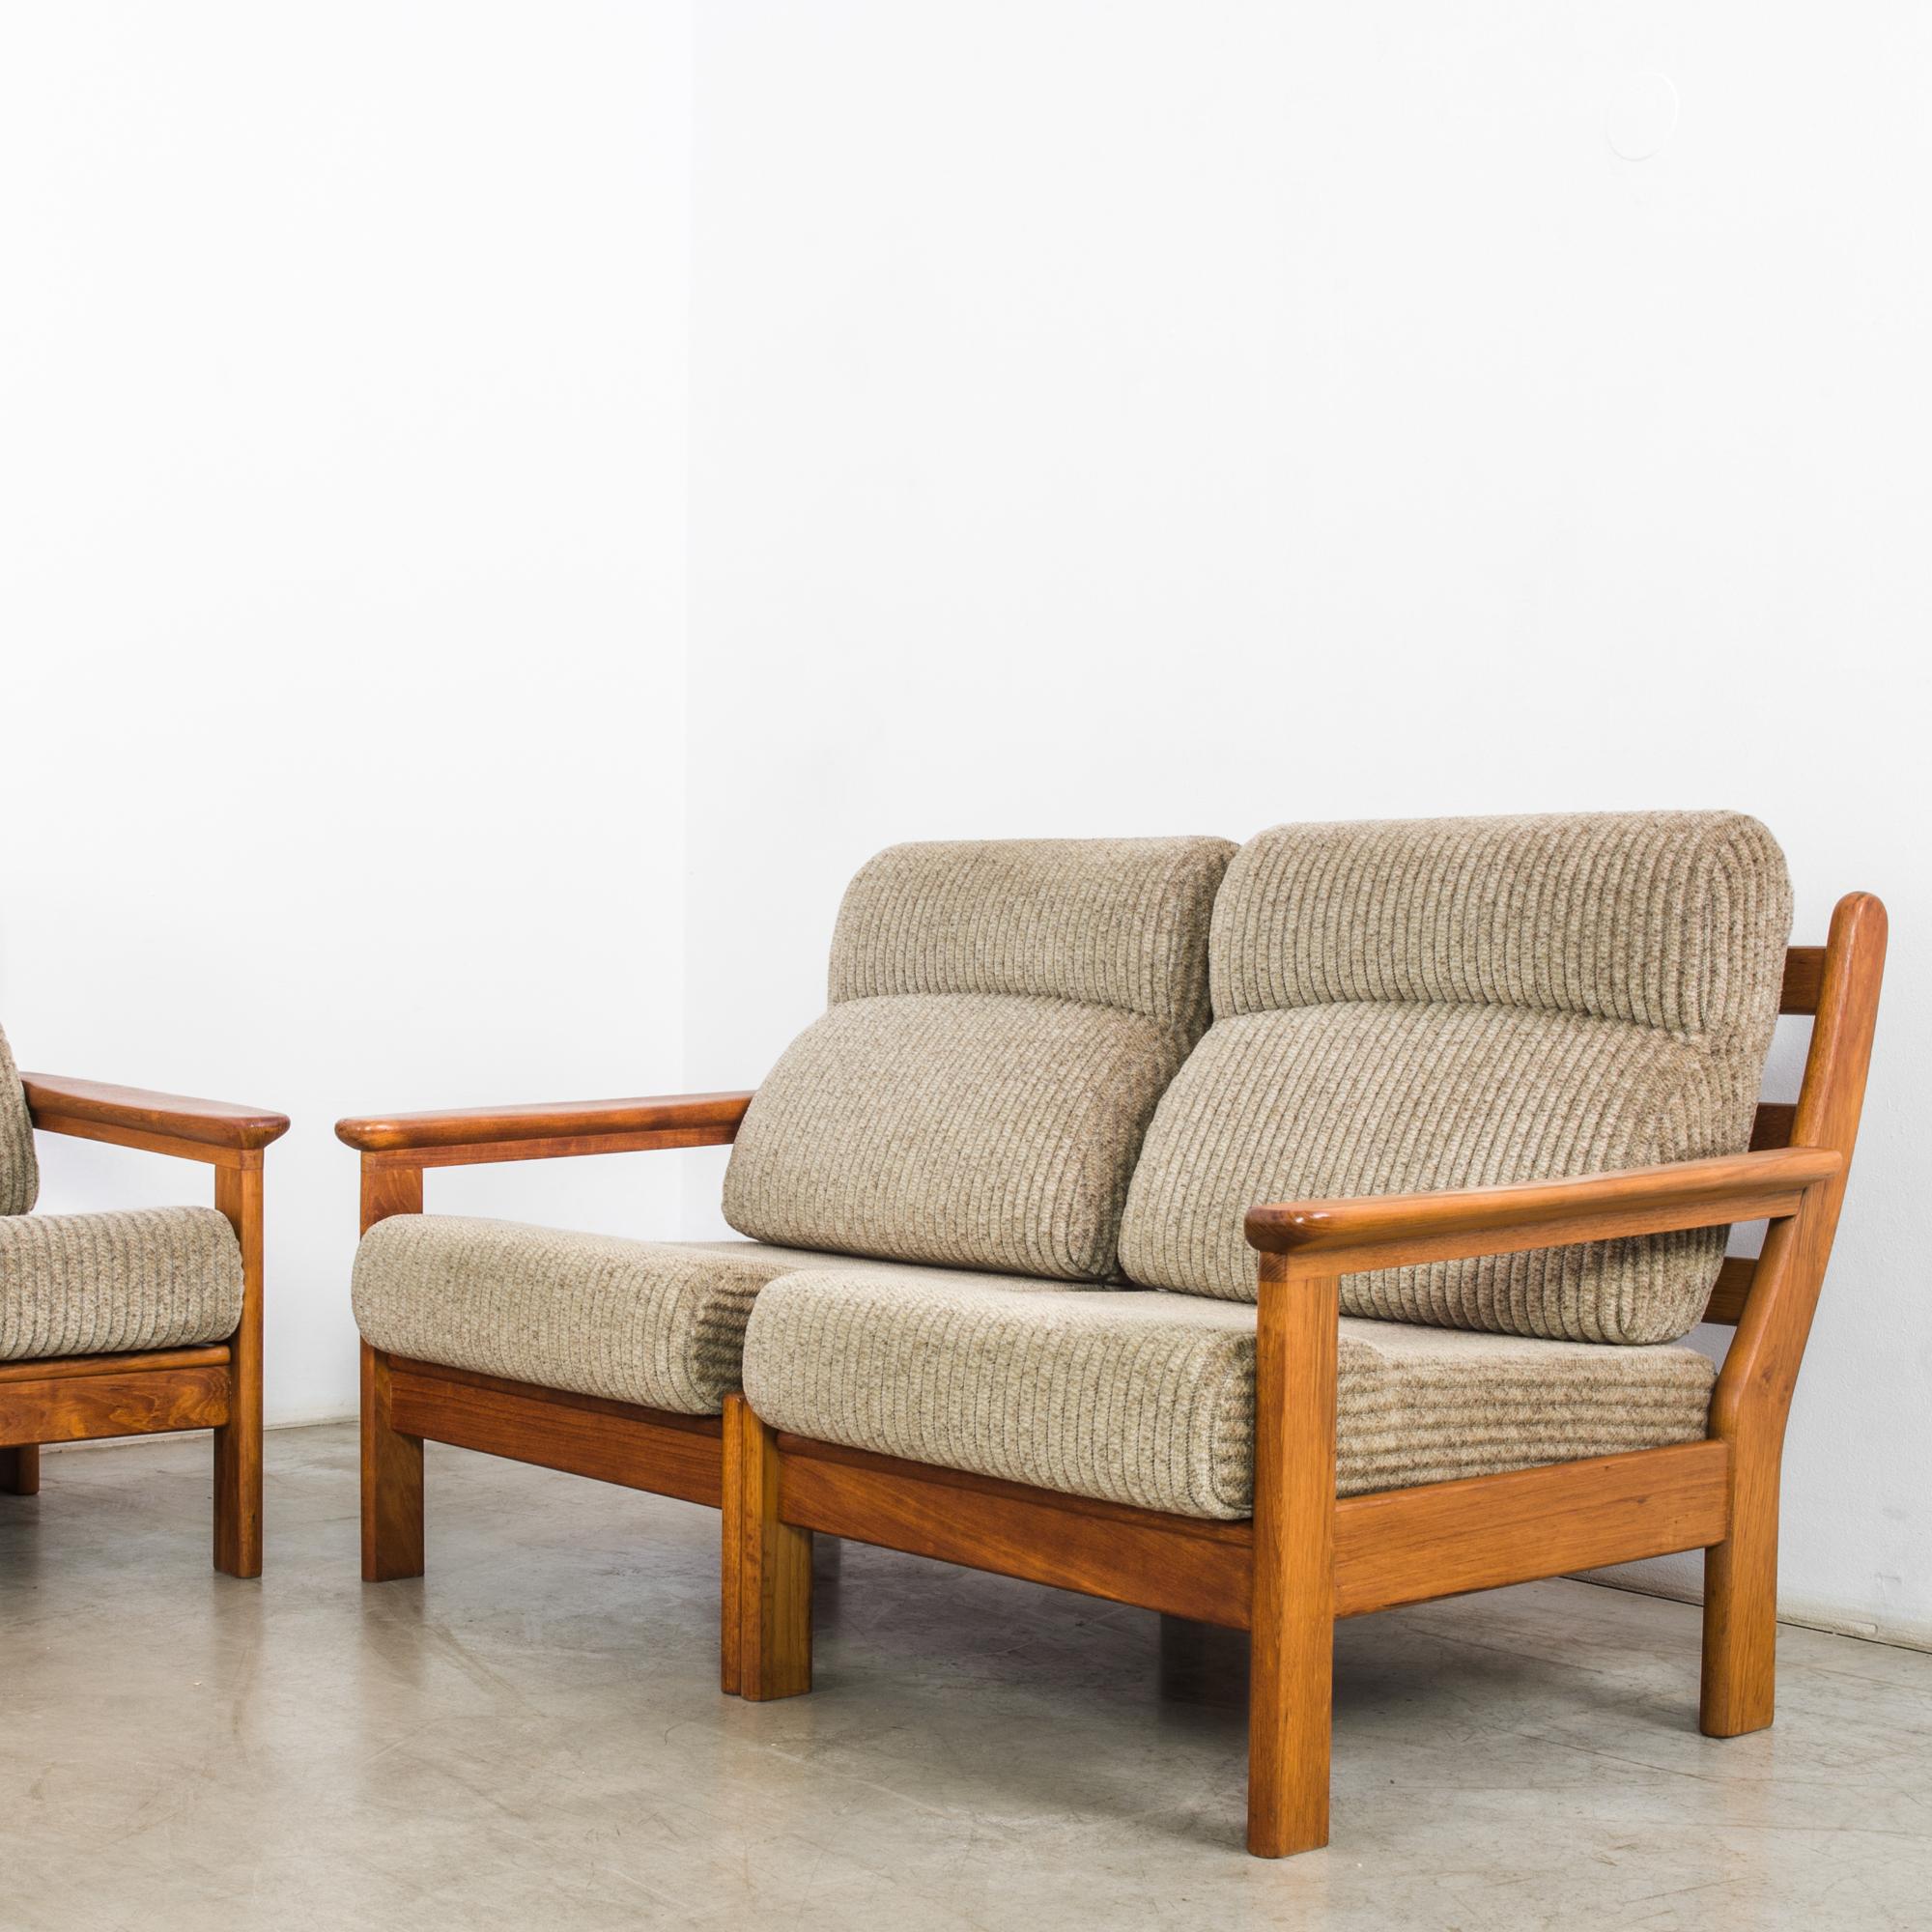 In the innovative design landscape of 1960s Denmark, this set of two sofas and an armchair epitomizes the sleek sophistication and minimalist charm of Scandinavian design. Crafted with meticulous attention to detail, these pieces represent the